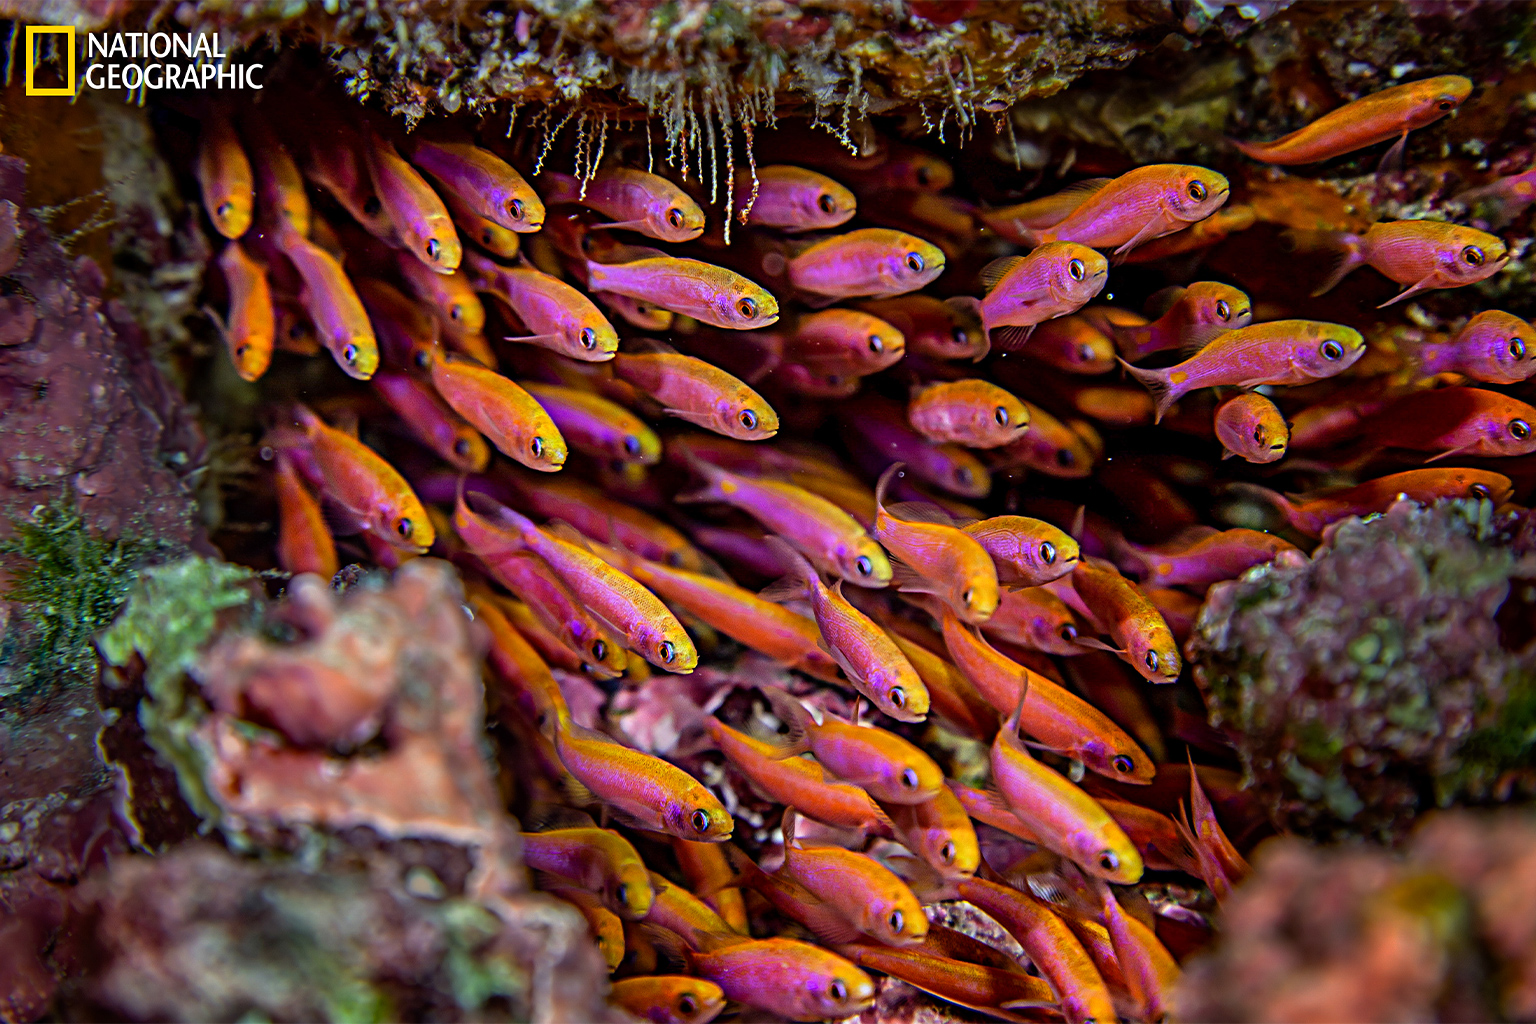 A school of small reef fish